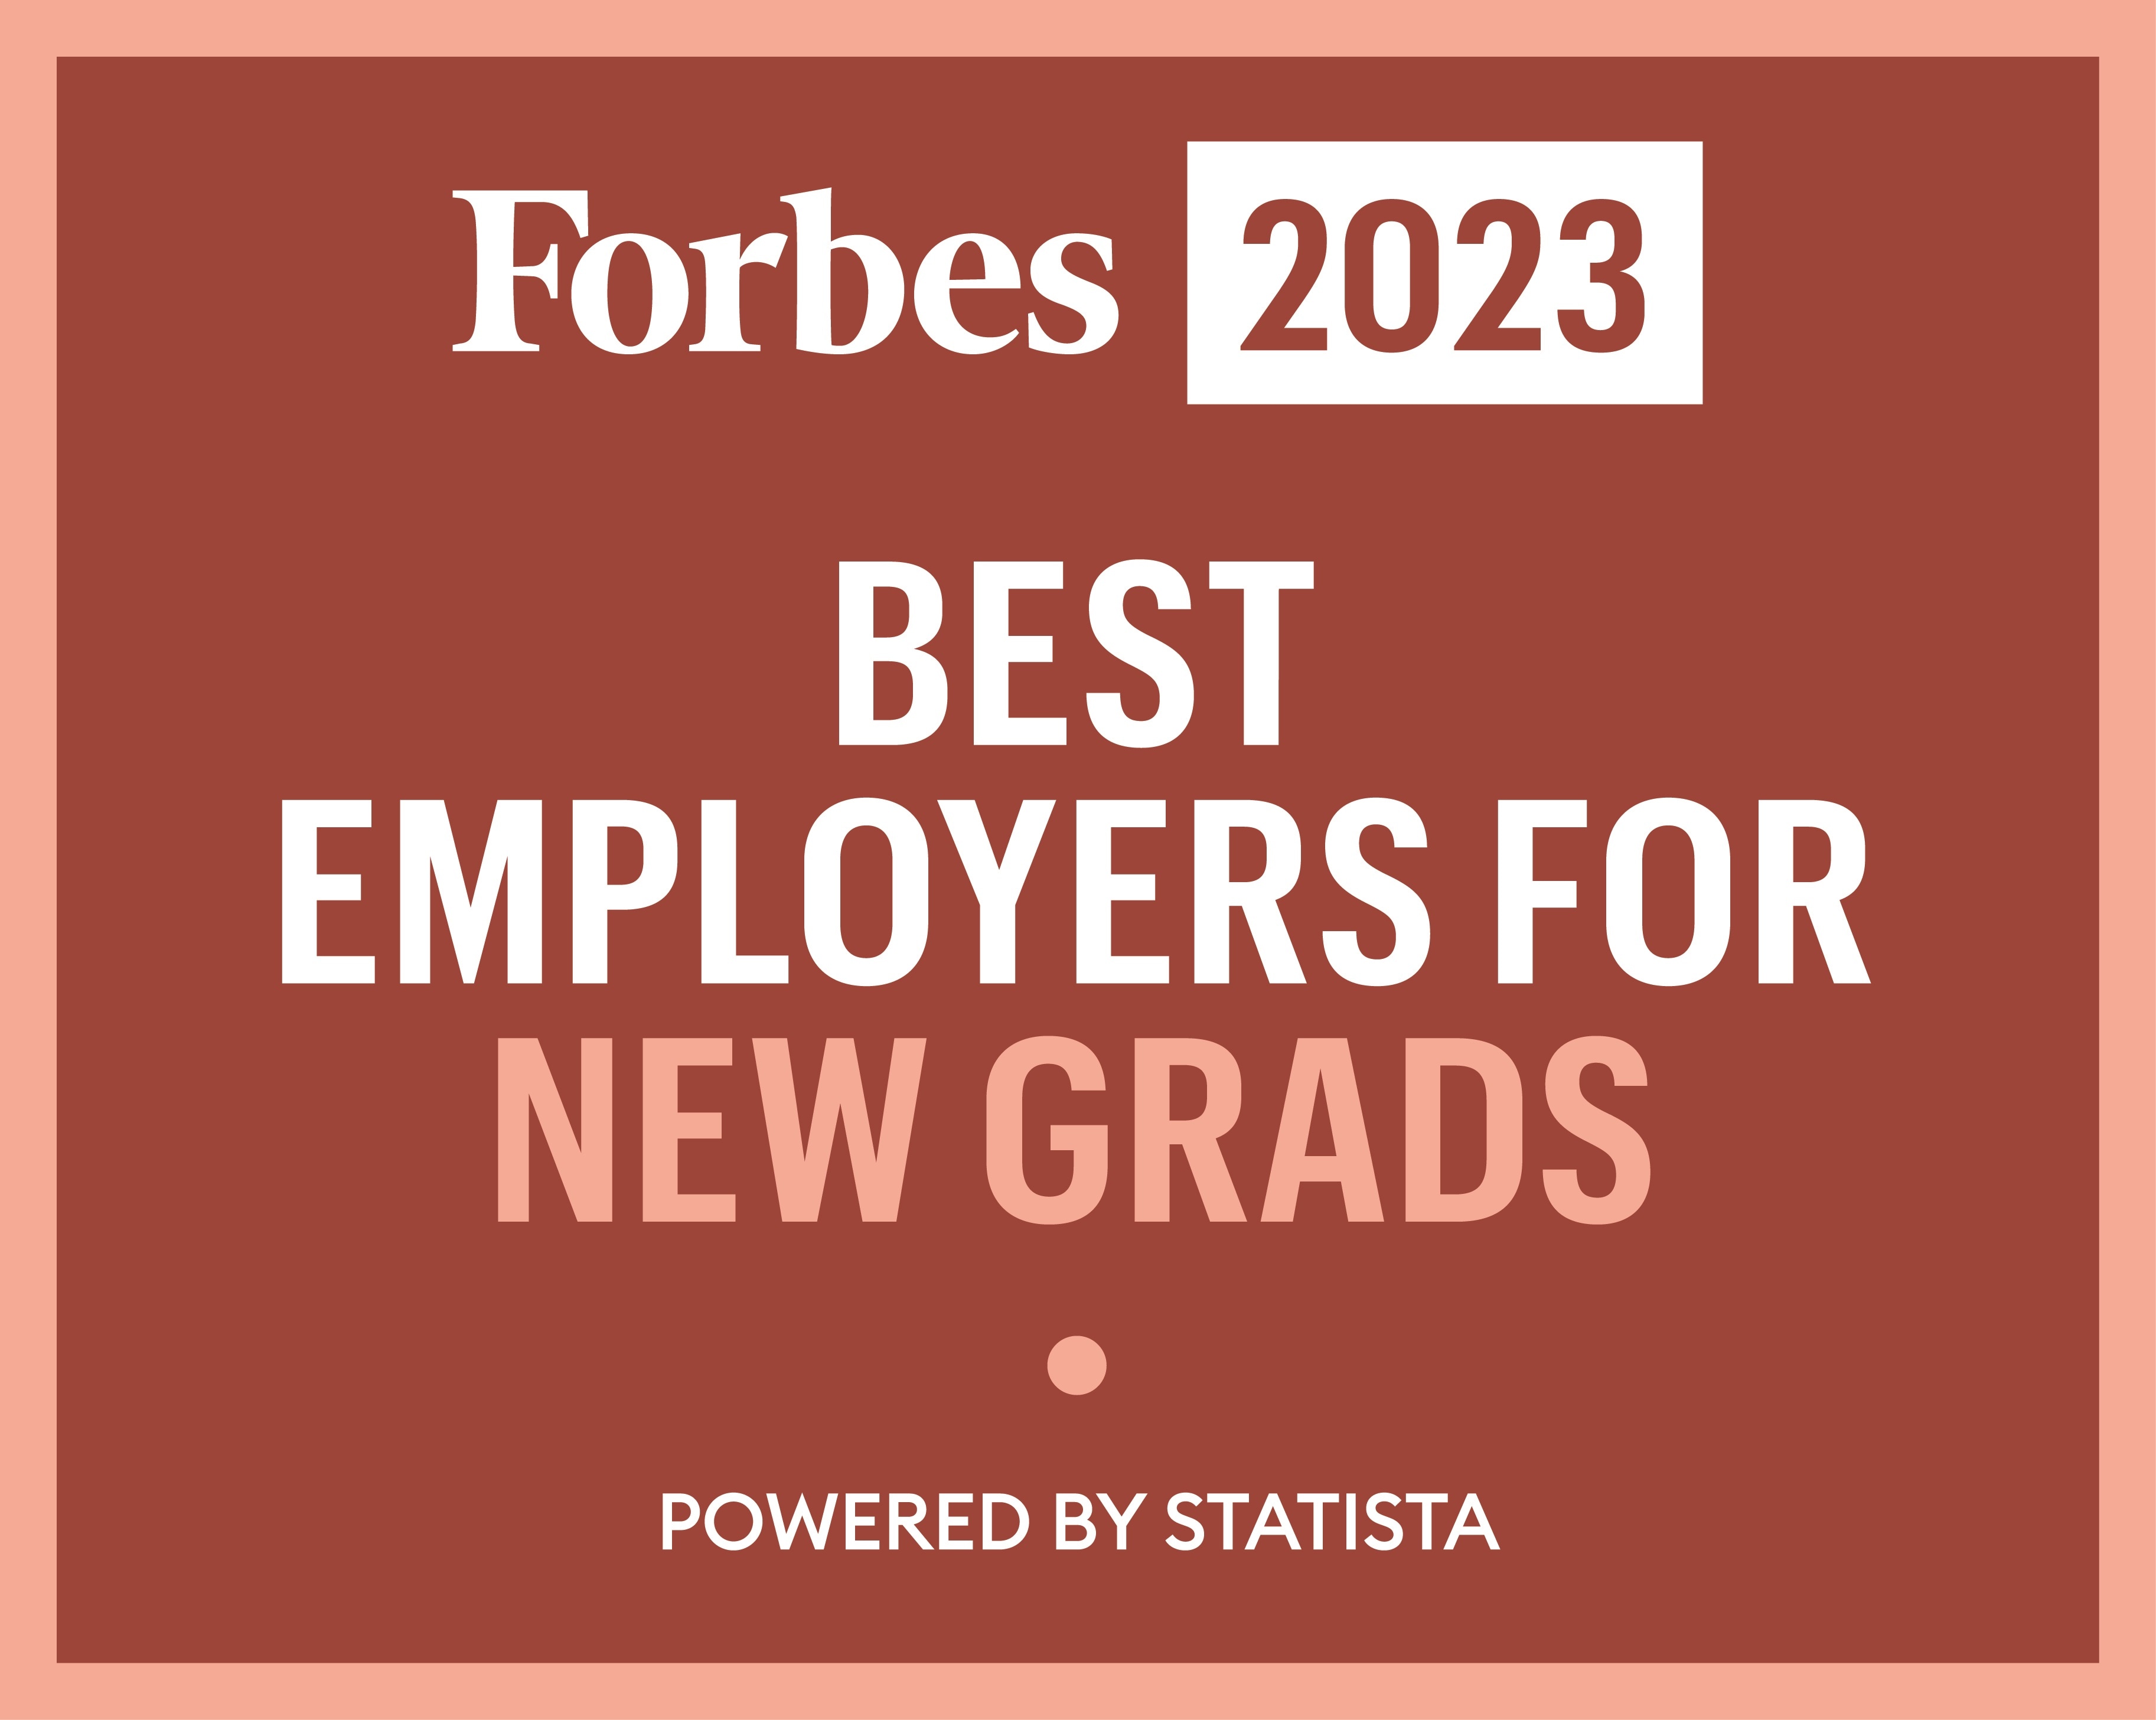 Forbes Best Employers for New Grads 2023